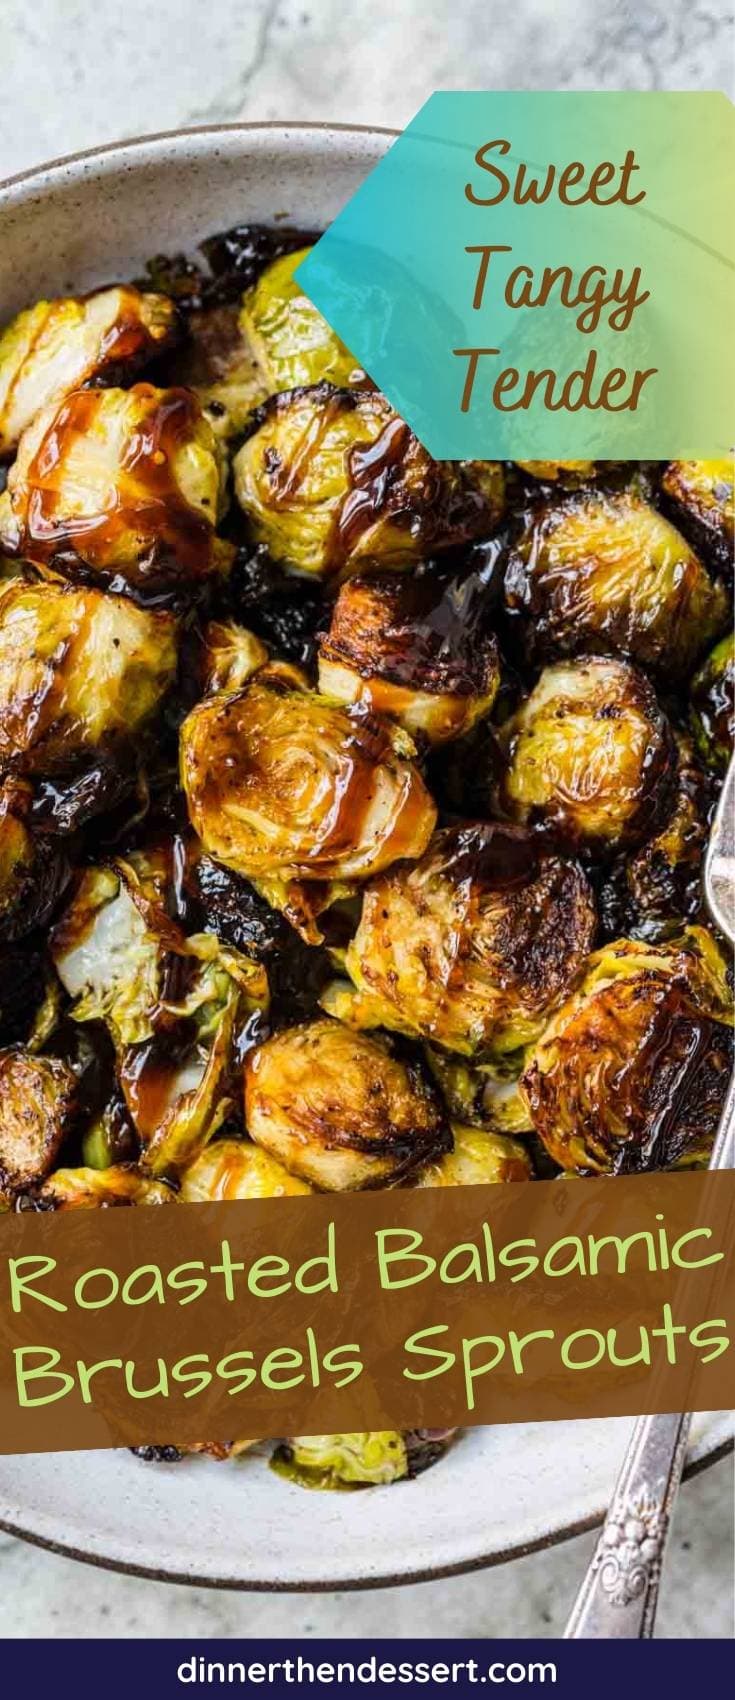 Roasted Balsamic Brussels Sprouts Pinterest image